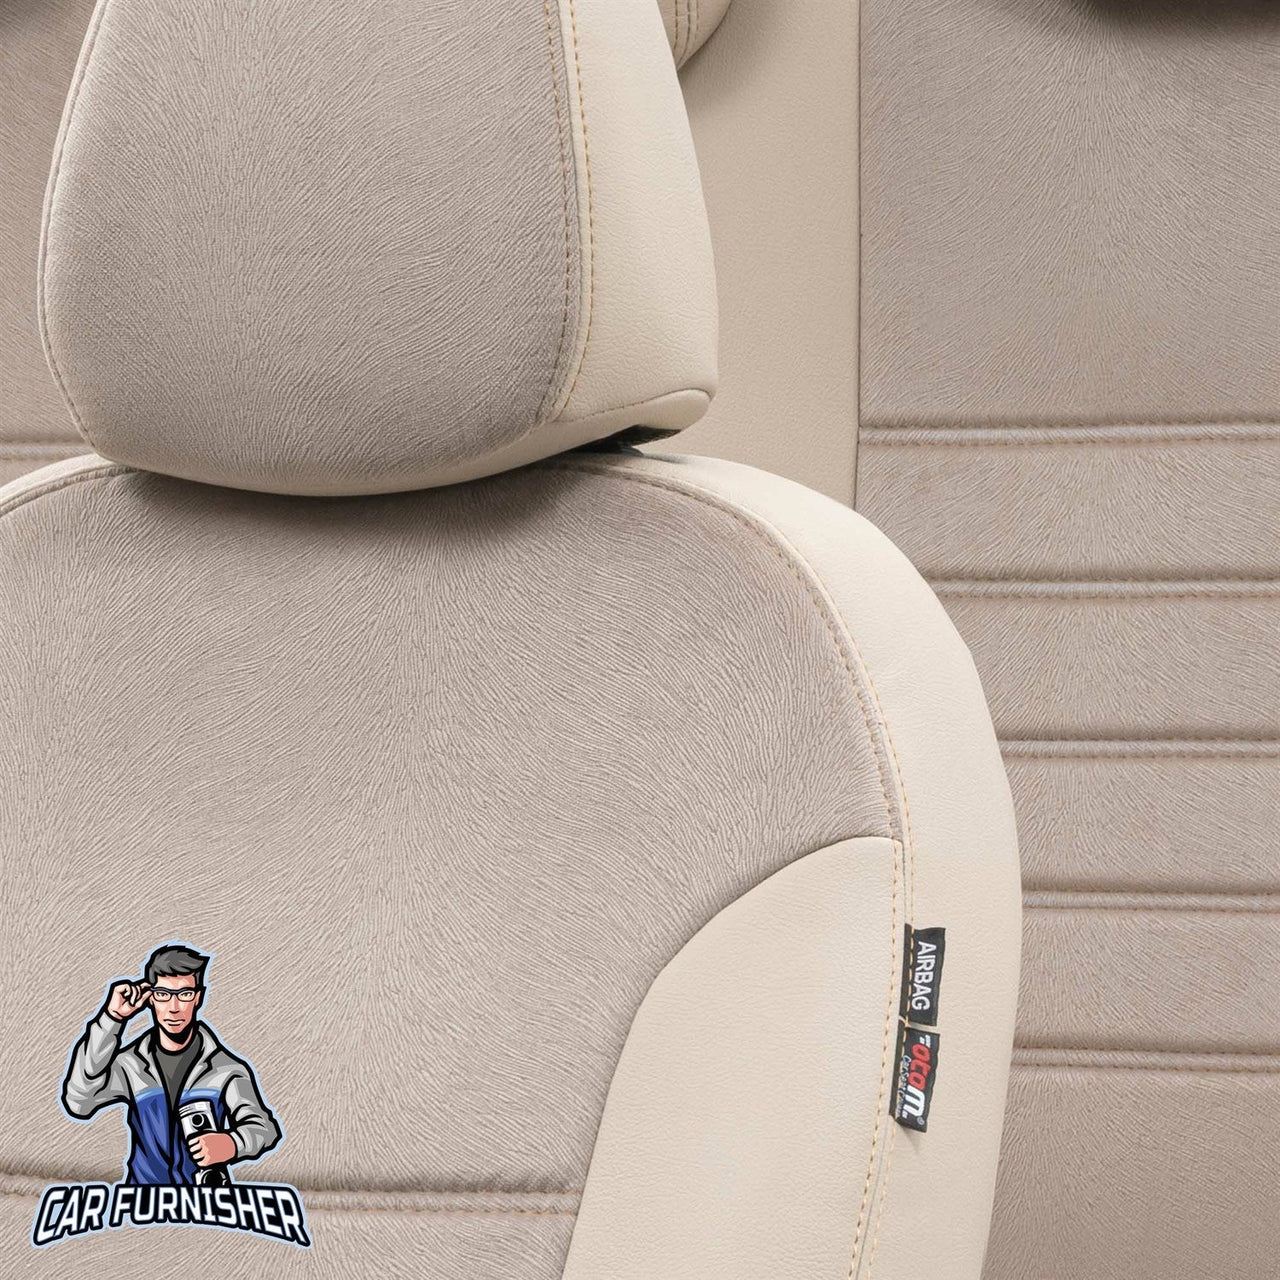 Chevrolet Captiva Seat Cover London Foal Feather Design Beige Leather & Foal Feather